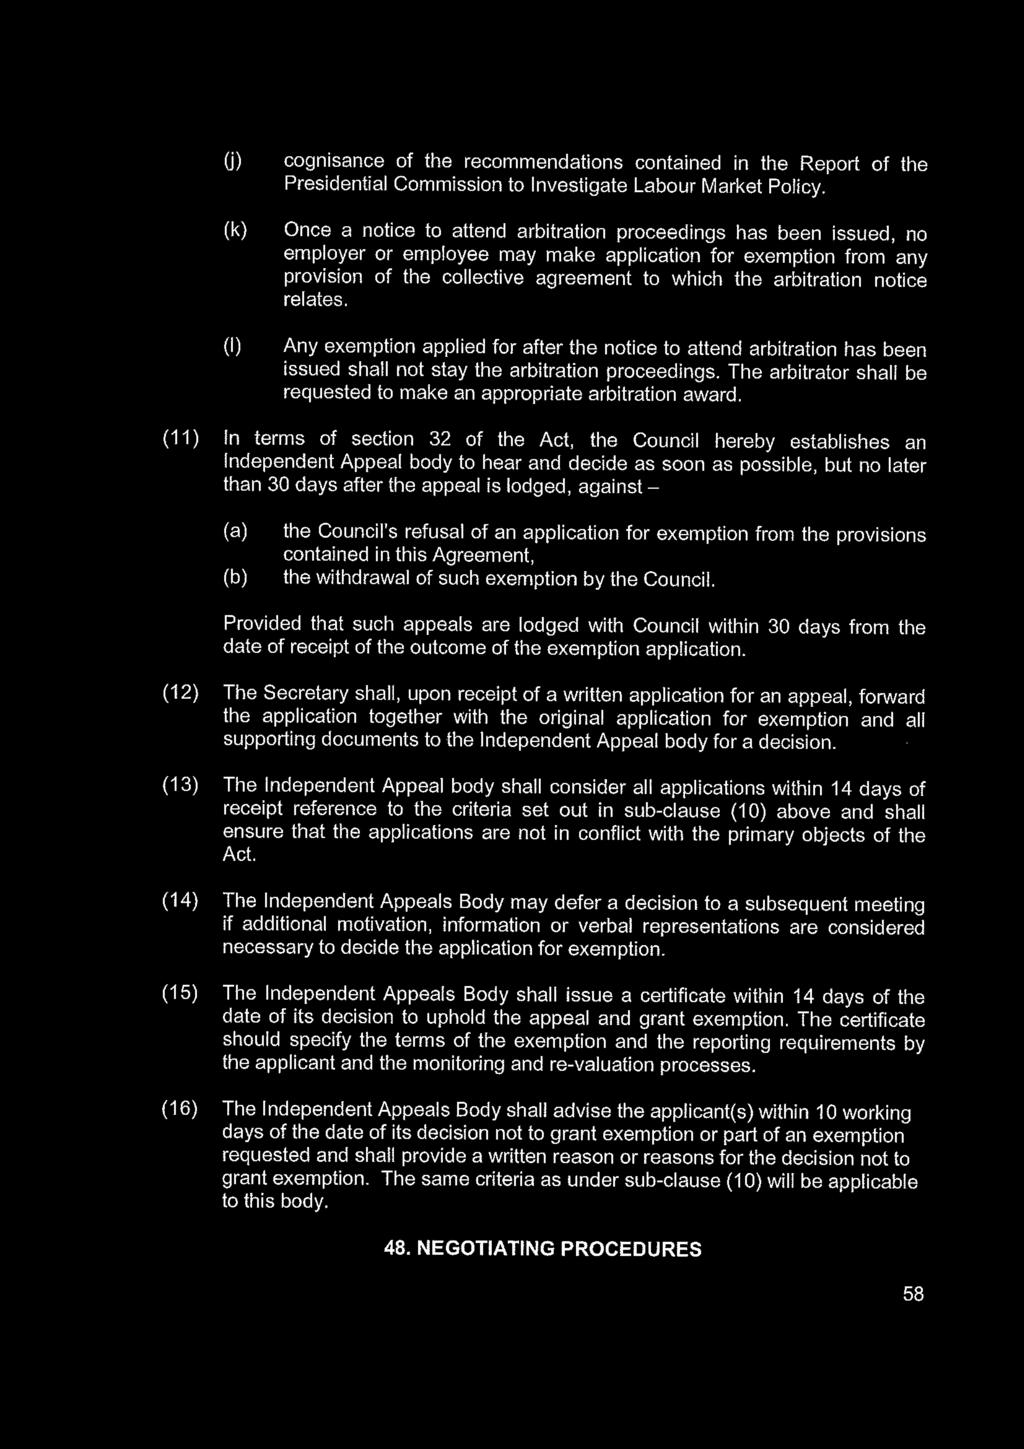 90 No. 40713 GOVERNMENT GAZETTE, 24 MARCH 2017 (j) (k) (I) cognisance of the recommendations contained in the Report of the Presidential Commission to Investigate Labour Market Policy.